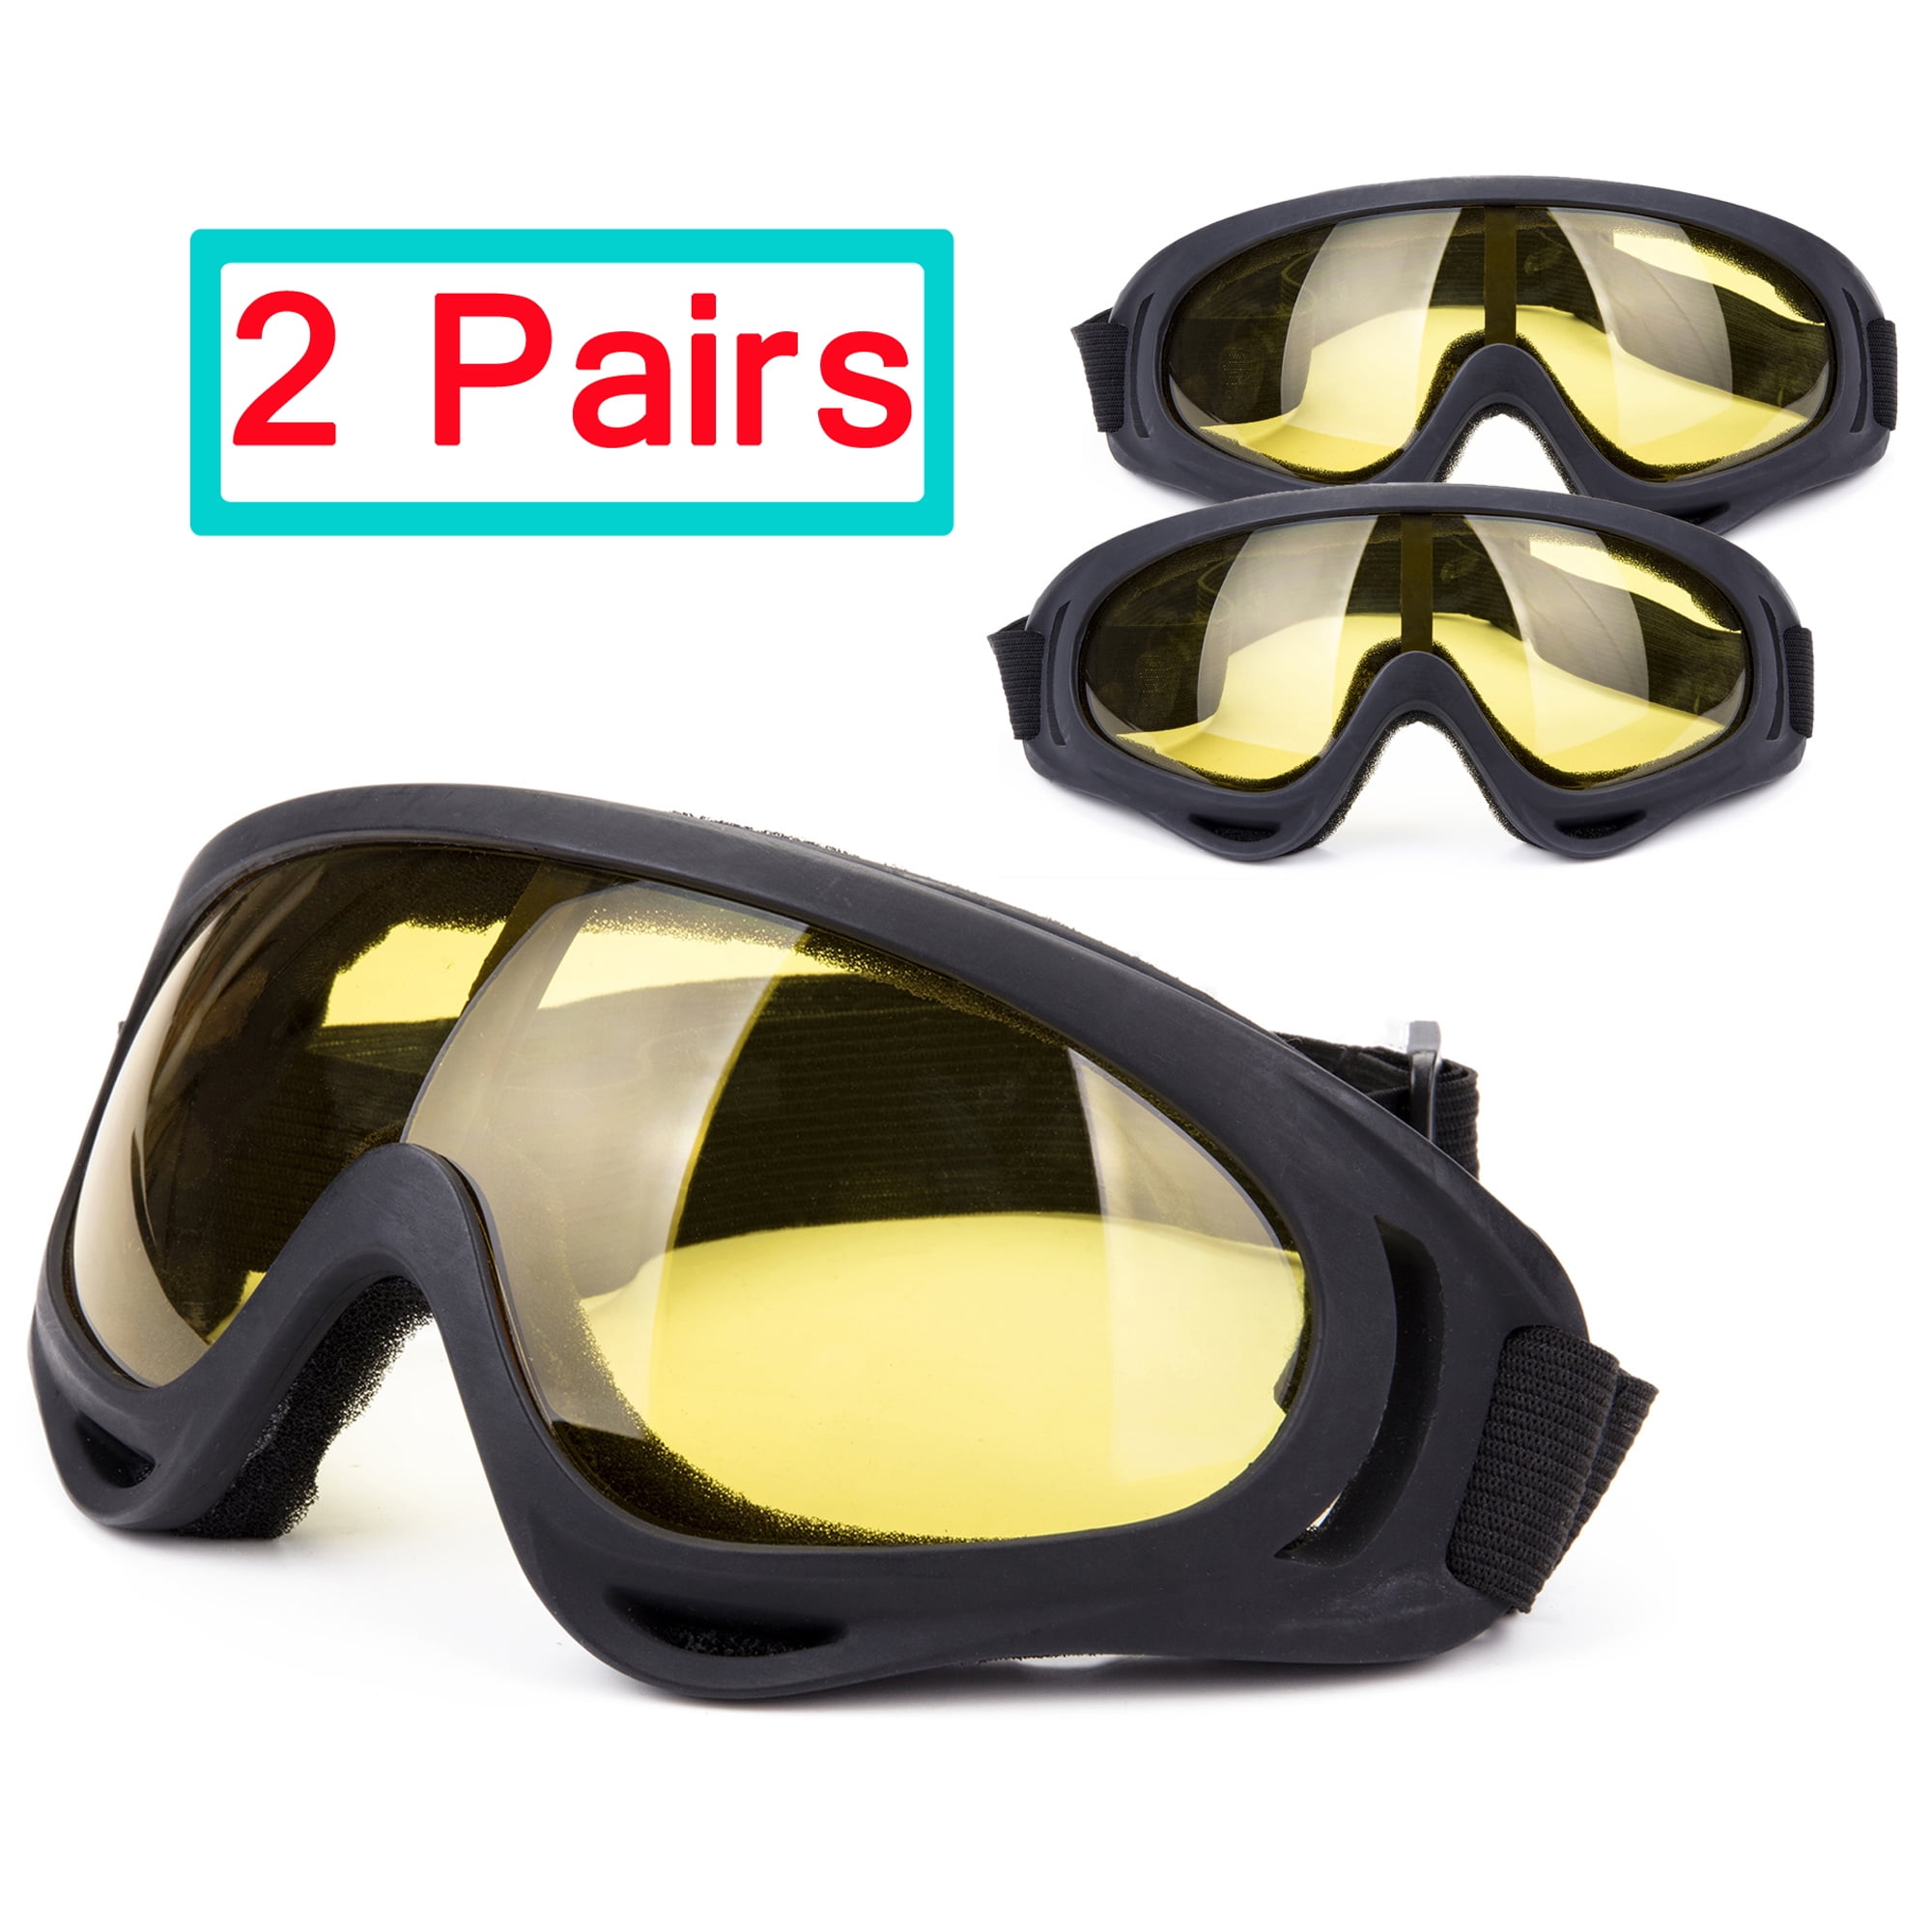 Lelinta 2 Pack Ski Goggles Snowboard Goggles for Men Women & Youth Snow Skiing Goggles 